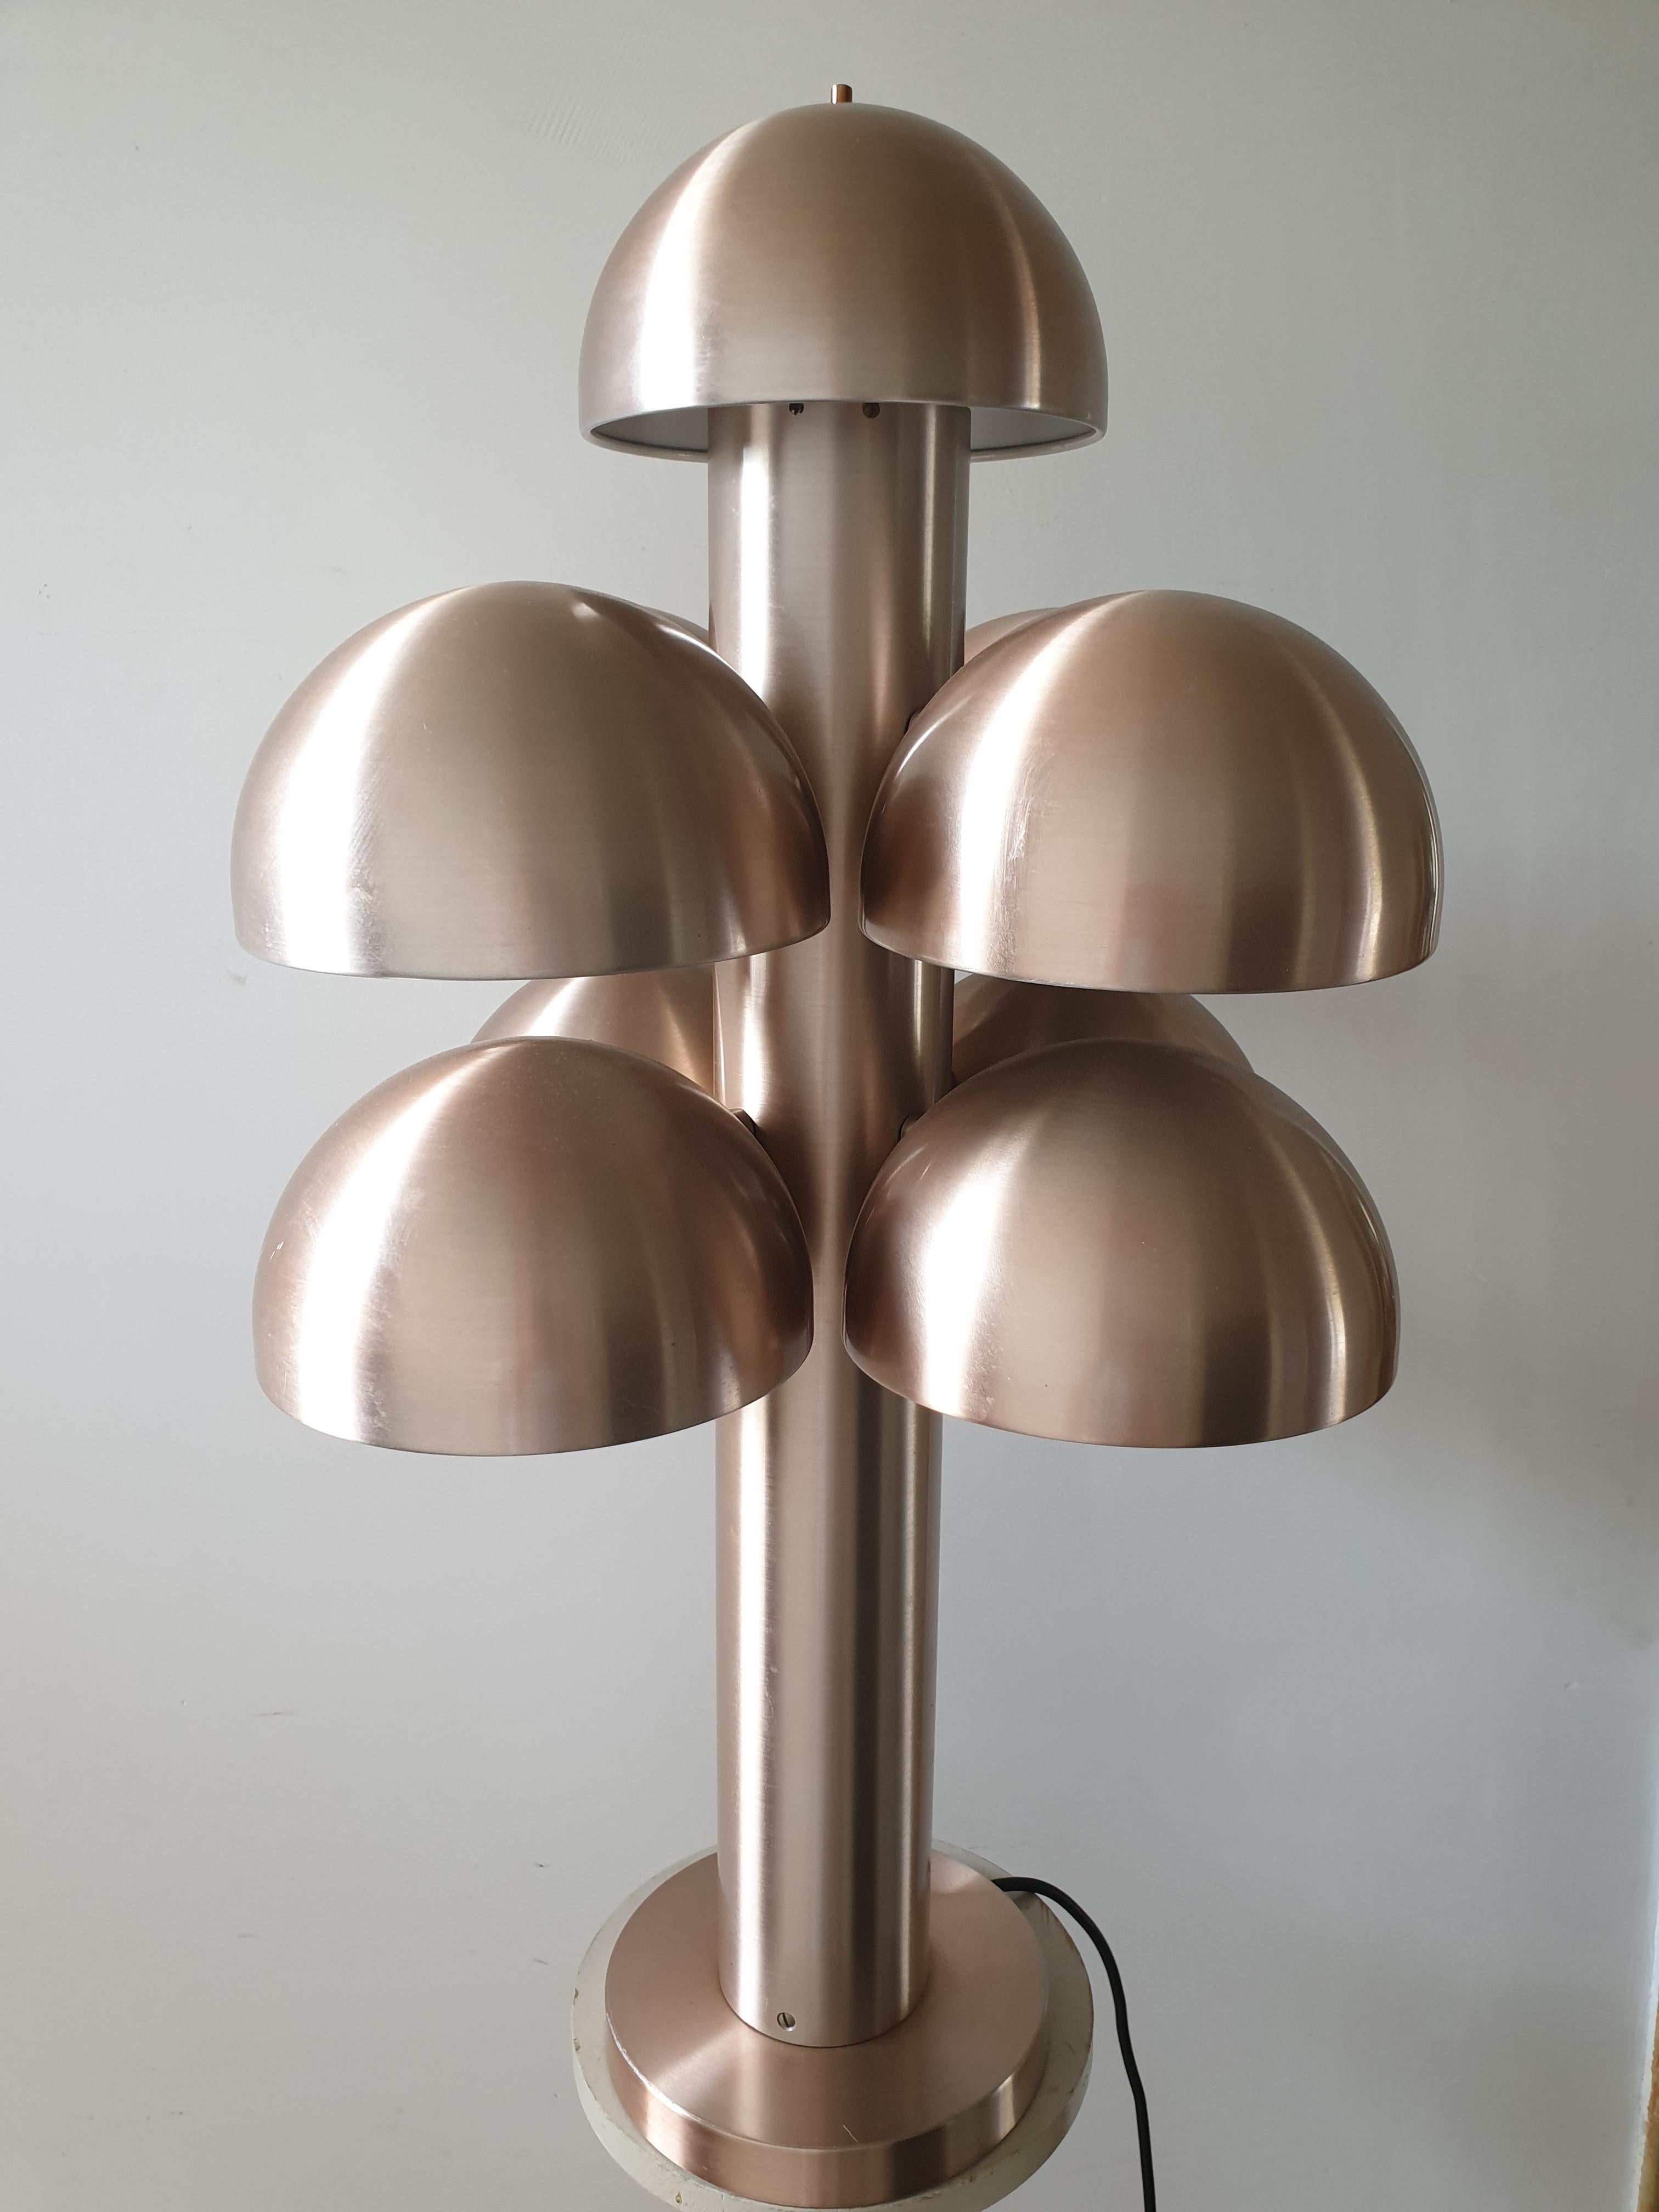 Set of stunning ''Cantharel'' table lamps designed by Maija Liisa Komulainen for RAAK Amsterdam, circa 1970. 

It may be obvious the name of the lamp refers to the ''Cantharel'' mushroom. 

This very rare set with it's amazing shape and size has